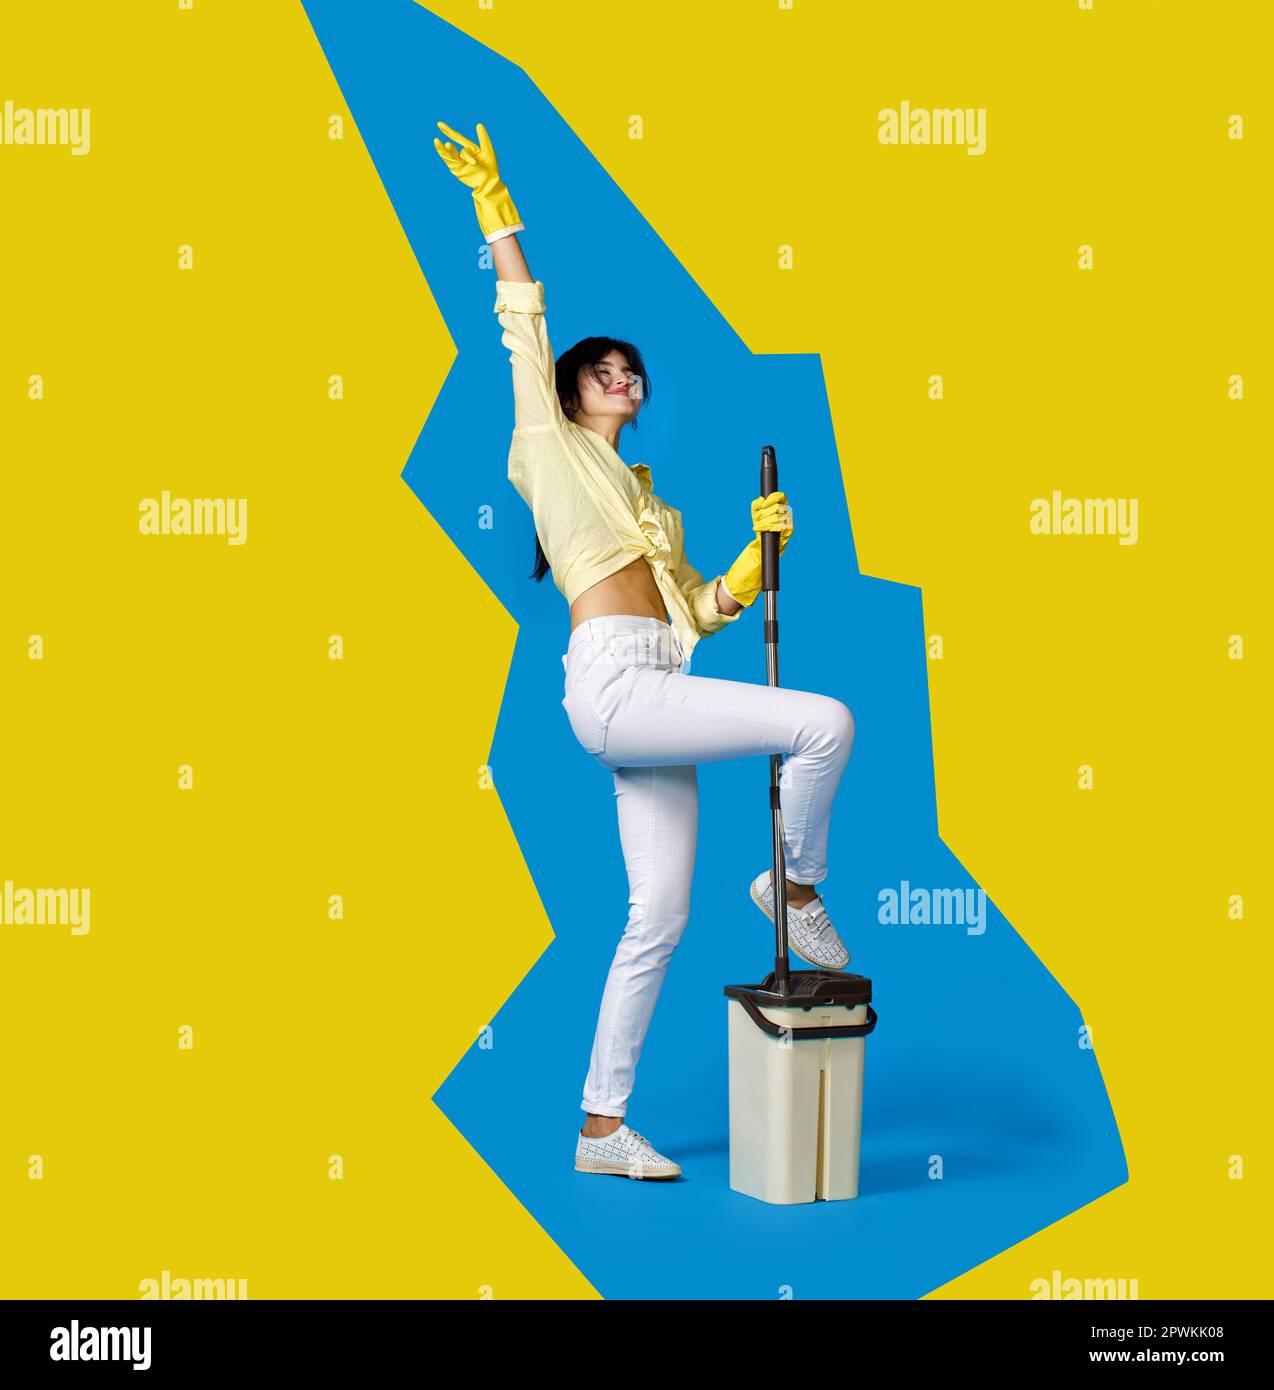 funny housewife girl in rubber gloves washing floor with mop and dancing on blue and yellow background. Full length Stock Photo